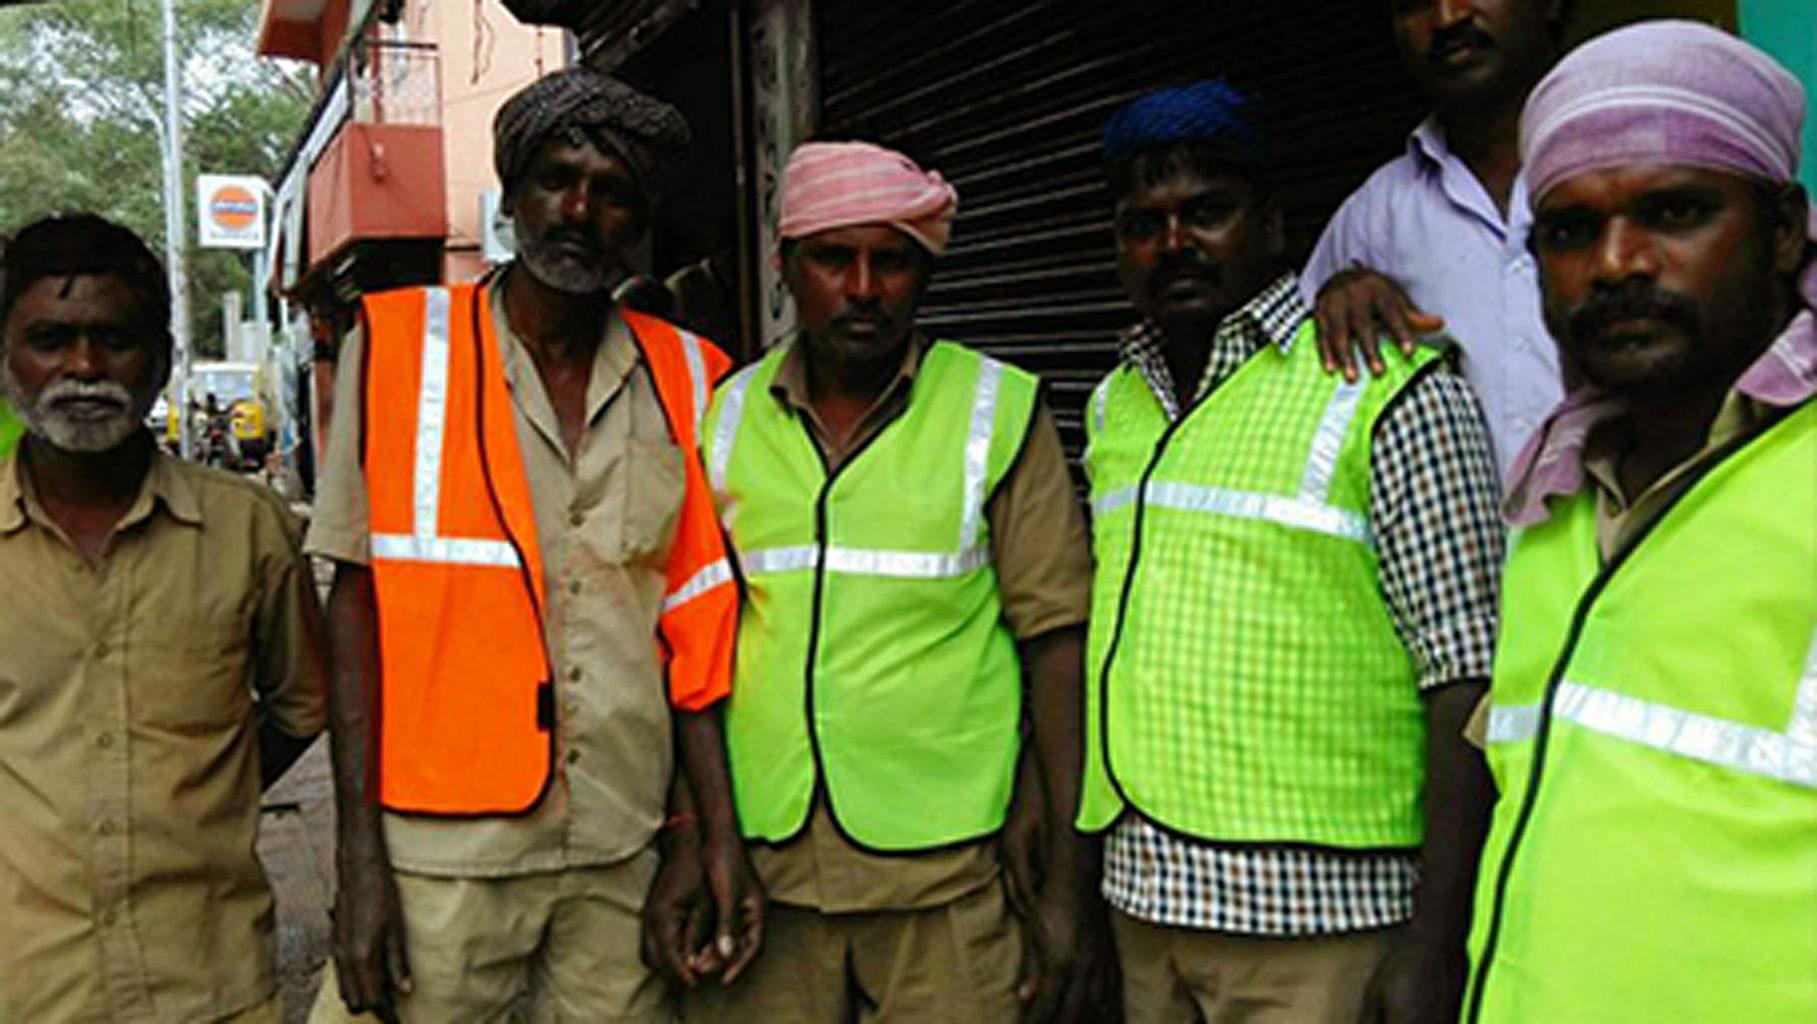  Sanitation workers deployed in several parts of the city. (Photo: TNM)